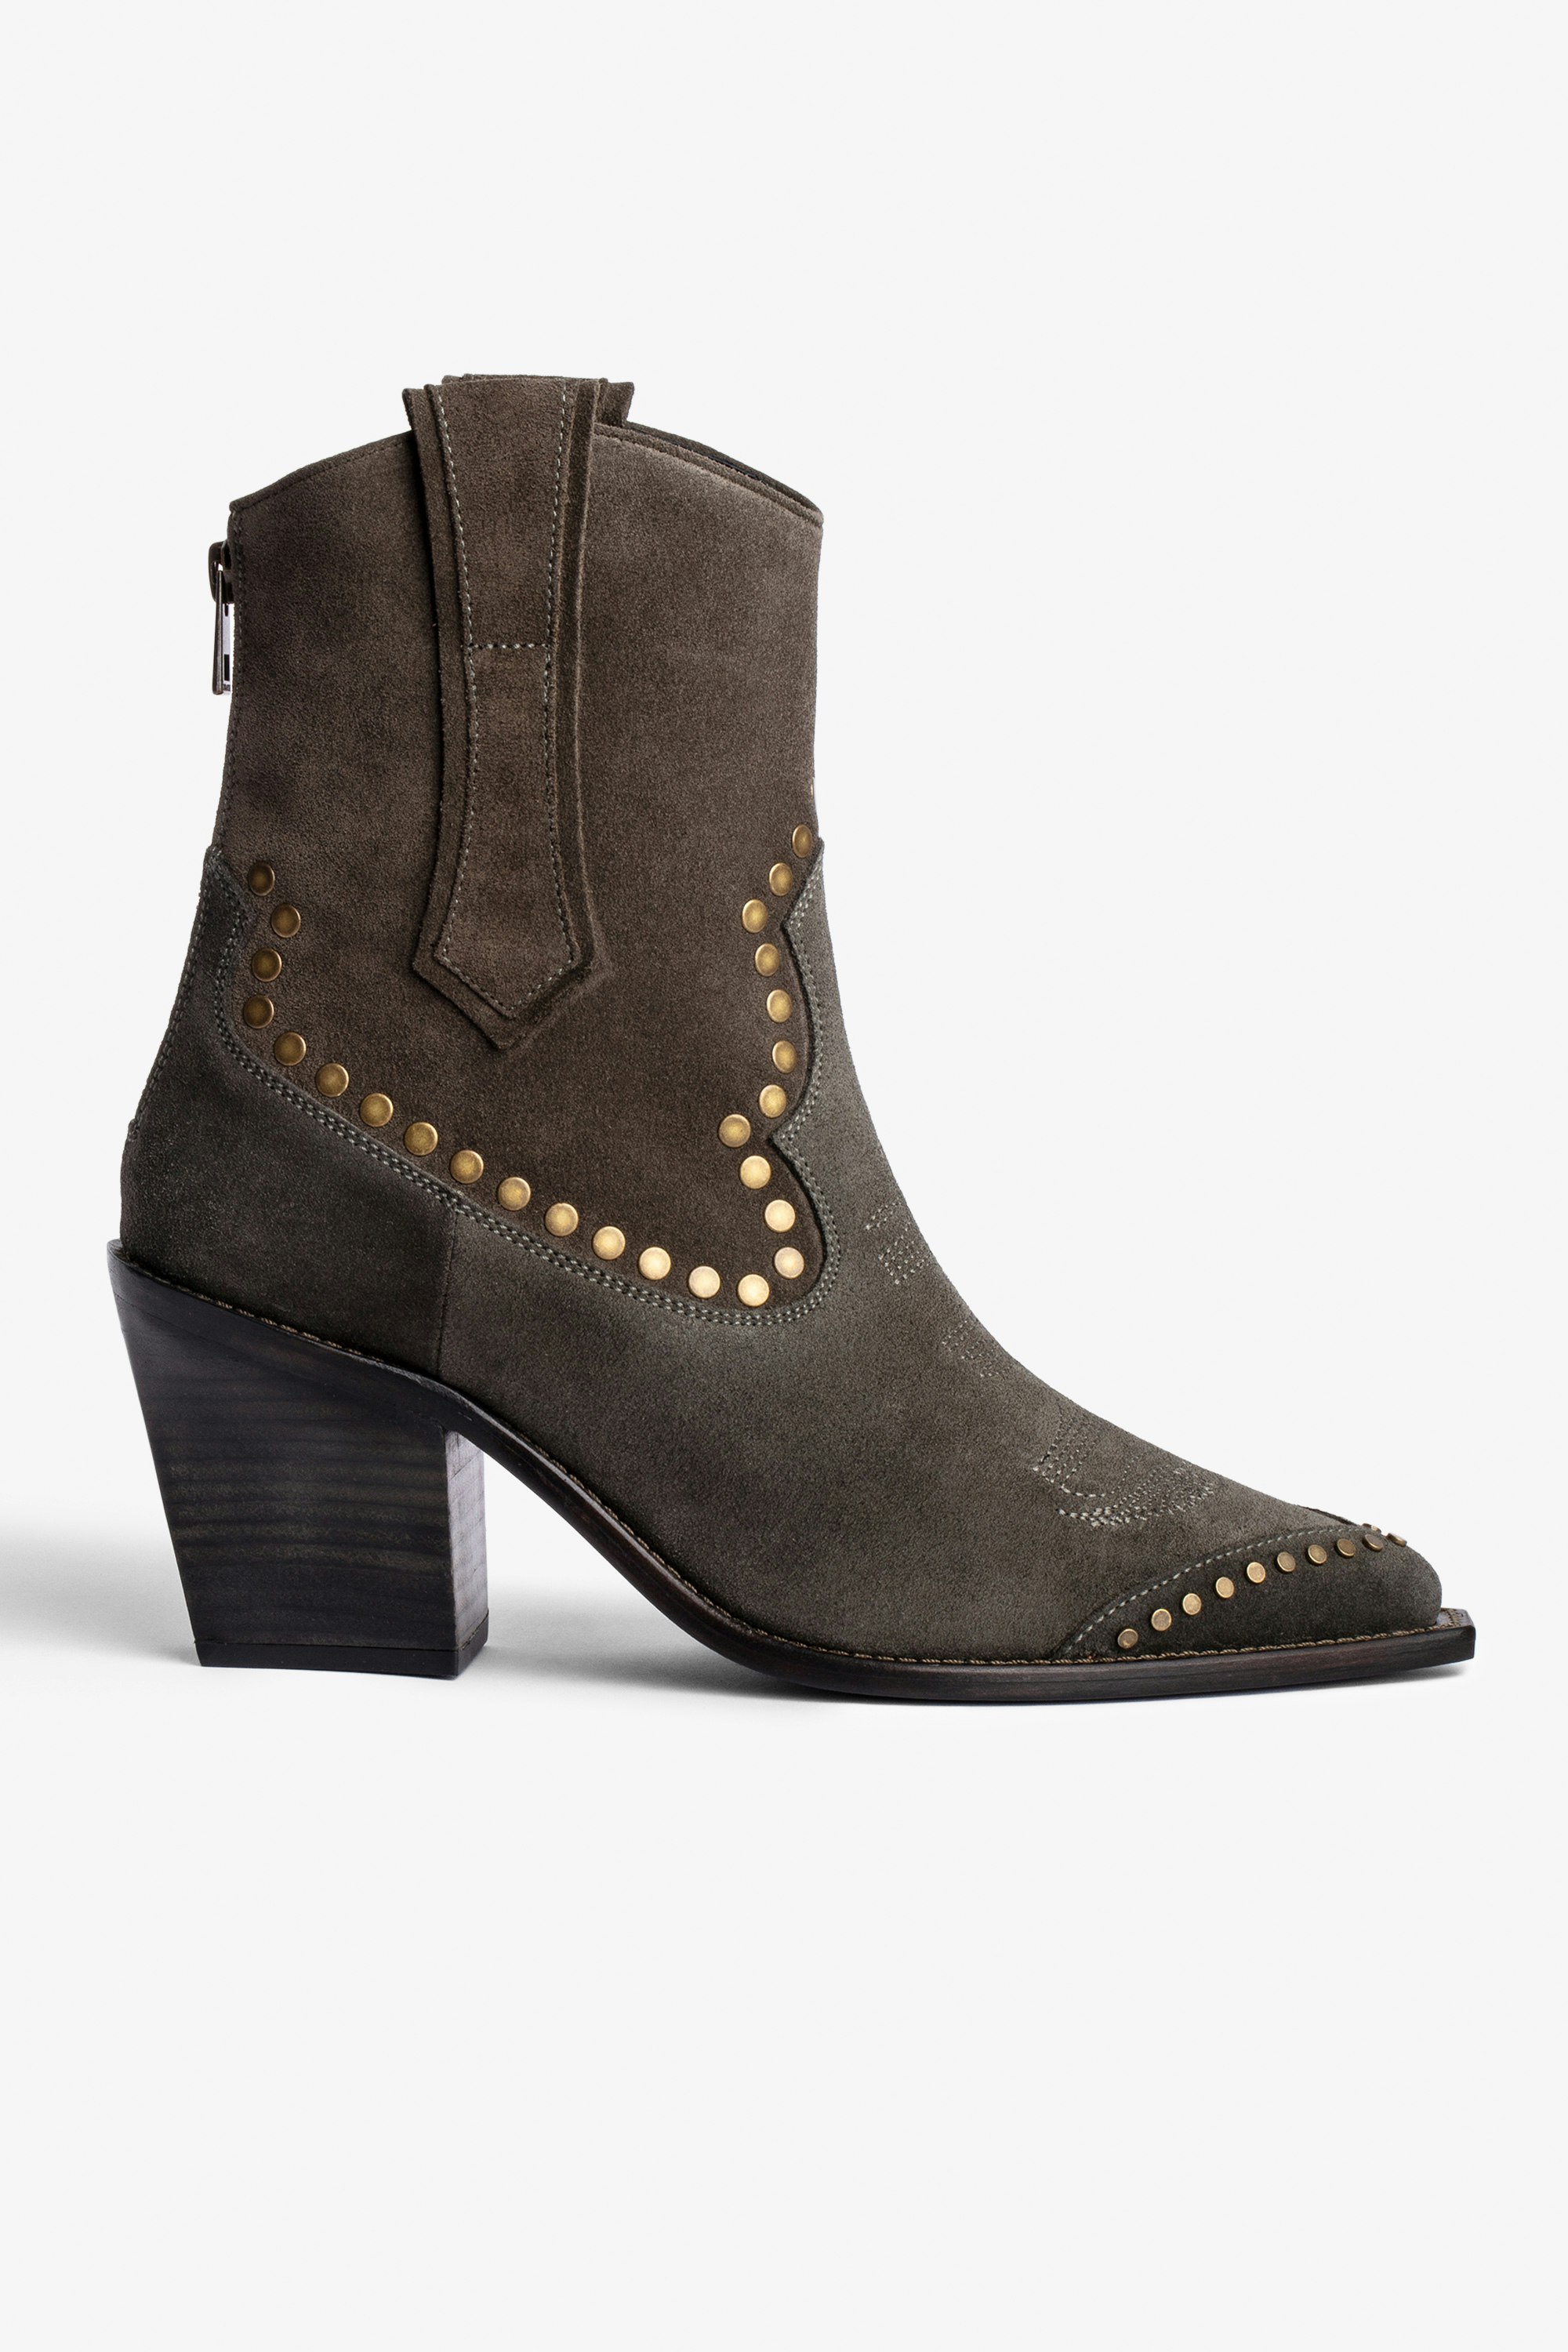 Cara High Boots undefined